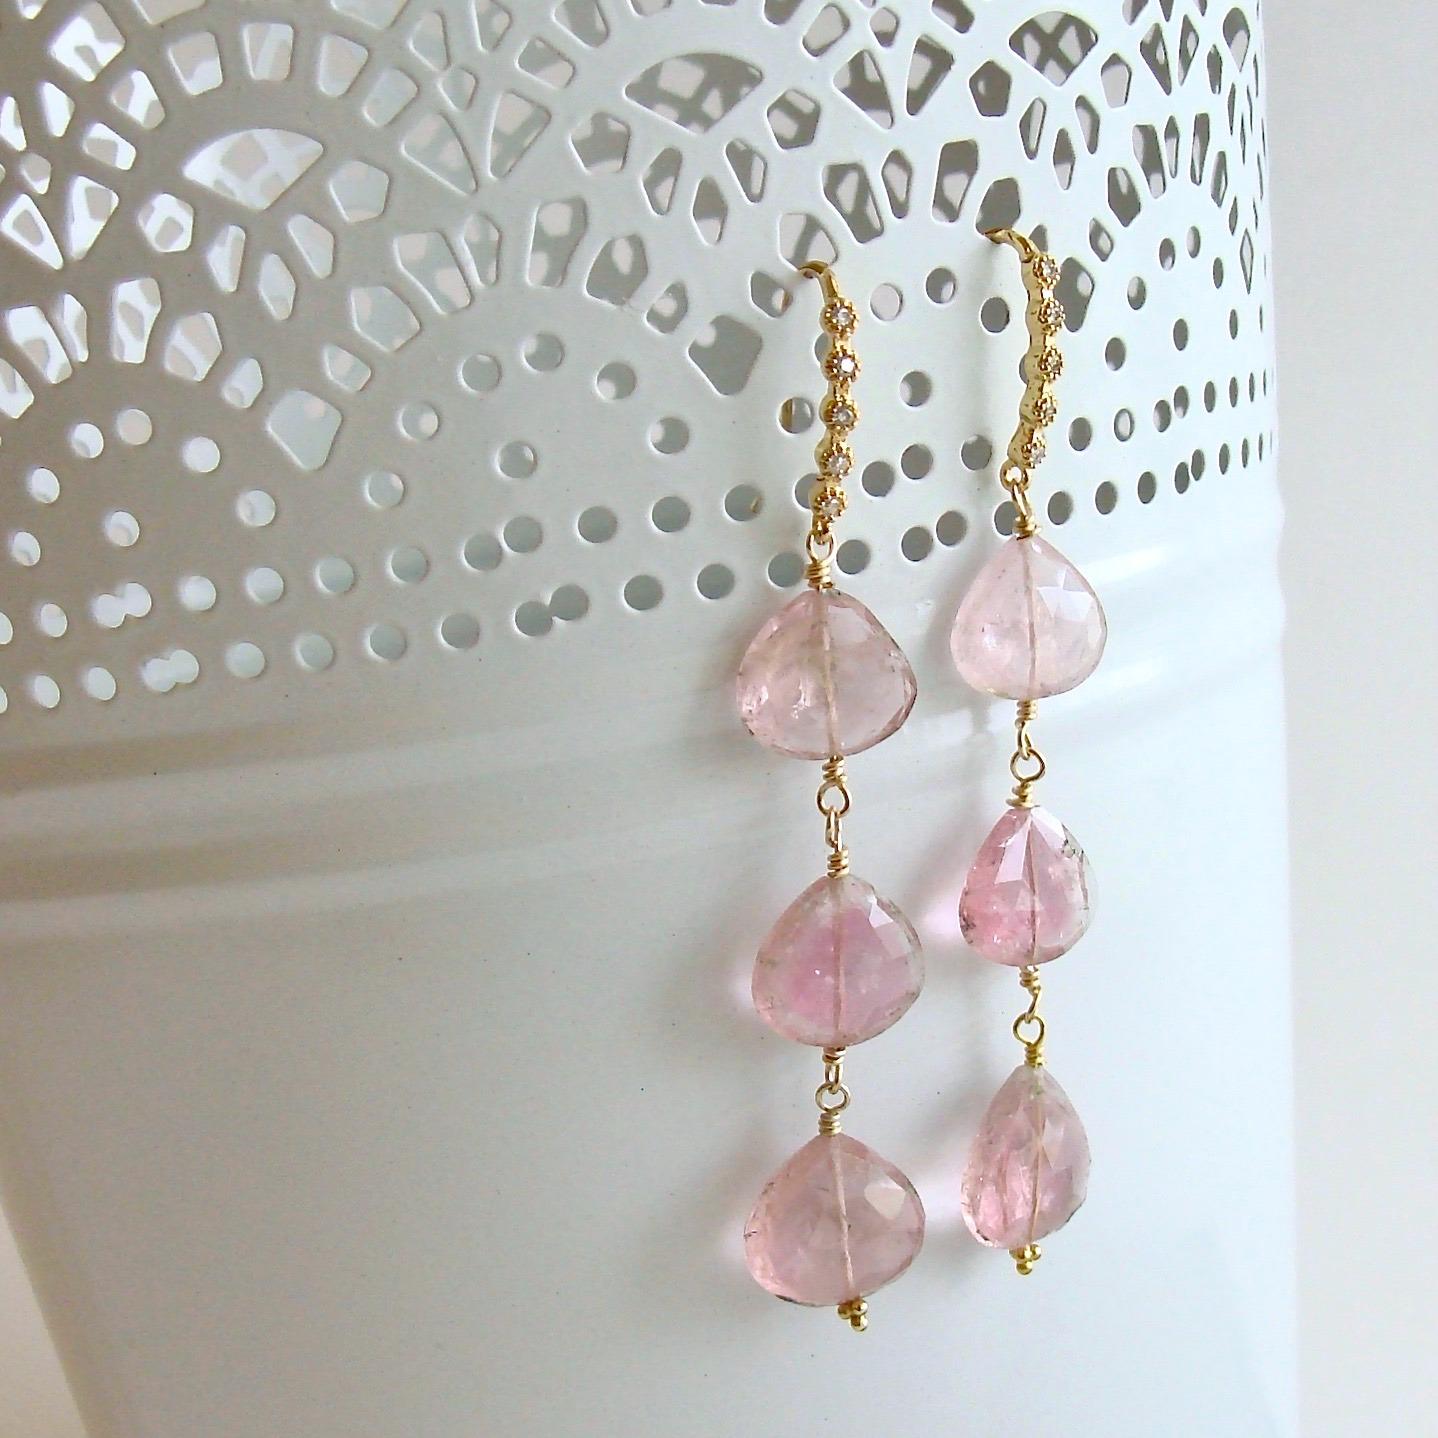 Triple Pink Afghan Tourmaline Cascading Hearts Earrings - Allison II Earrings

Remarkable cascading pink pastel Afghan tourmaline hearts are suspended by delicate CZ floral ear wires.  These confectionary pink colors  include just a whisper of the